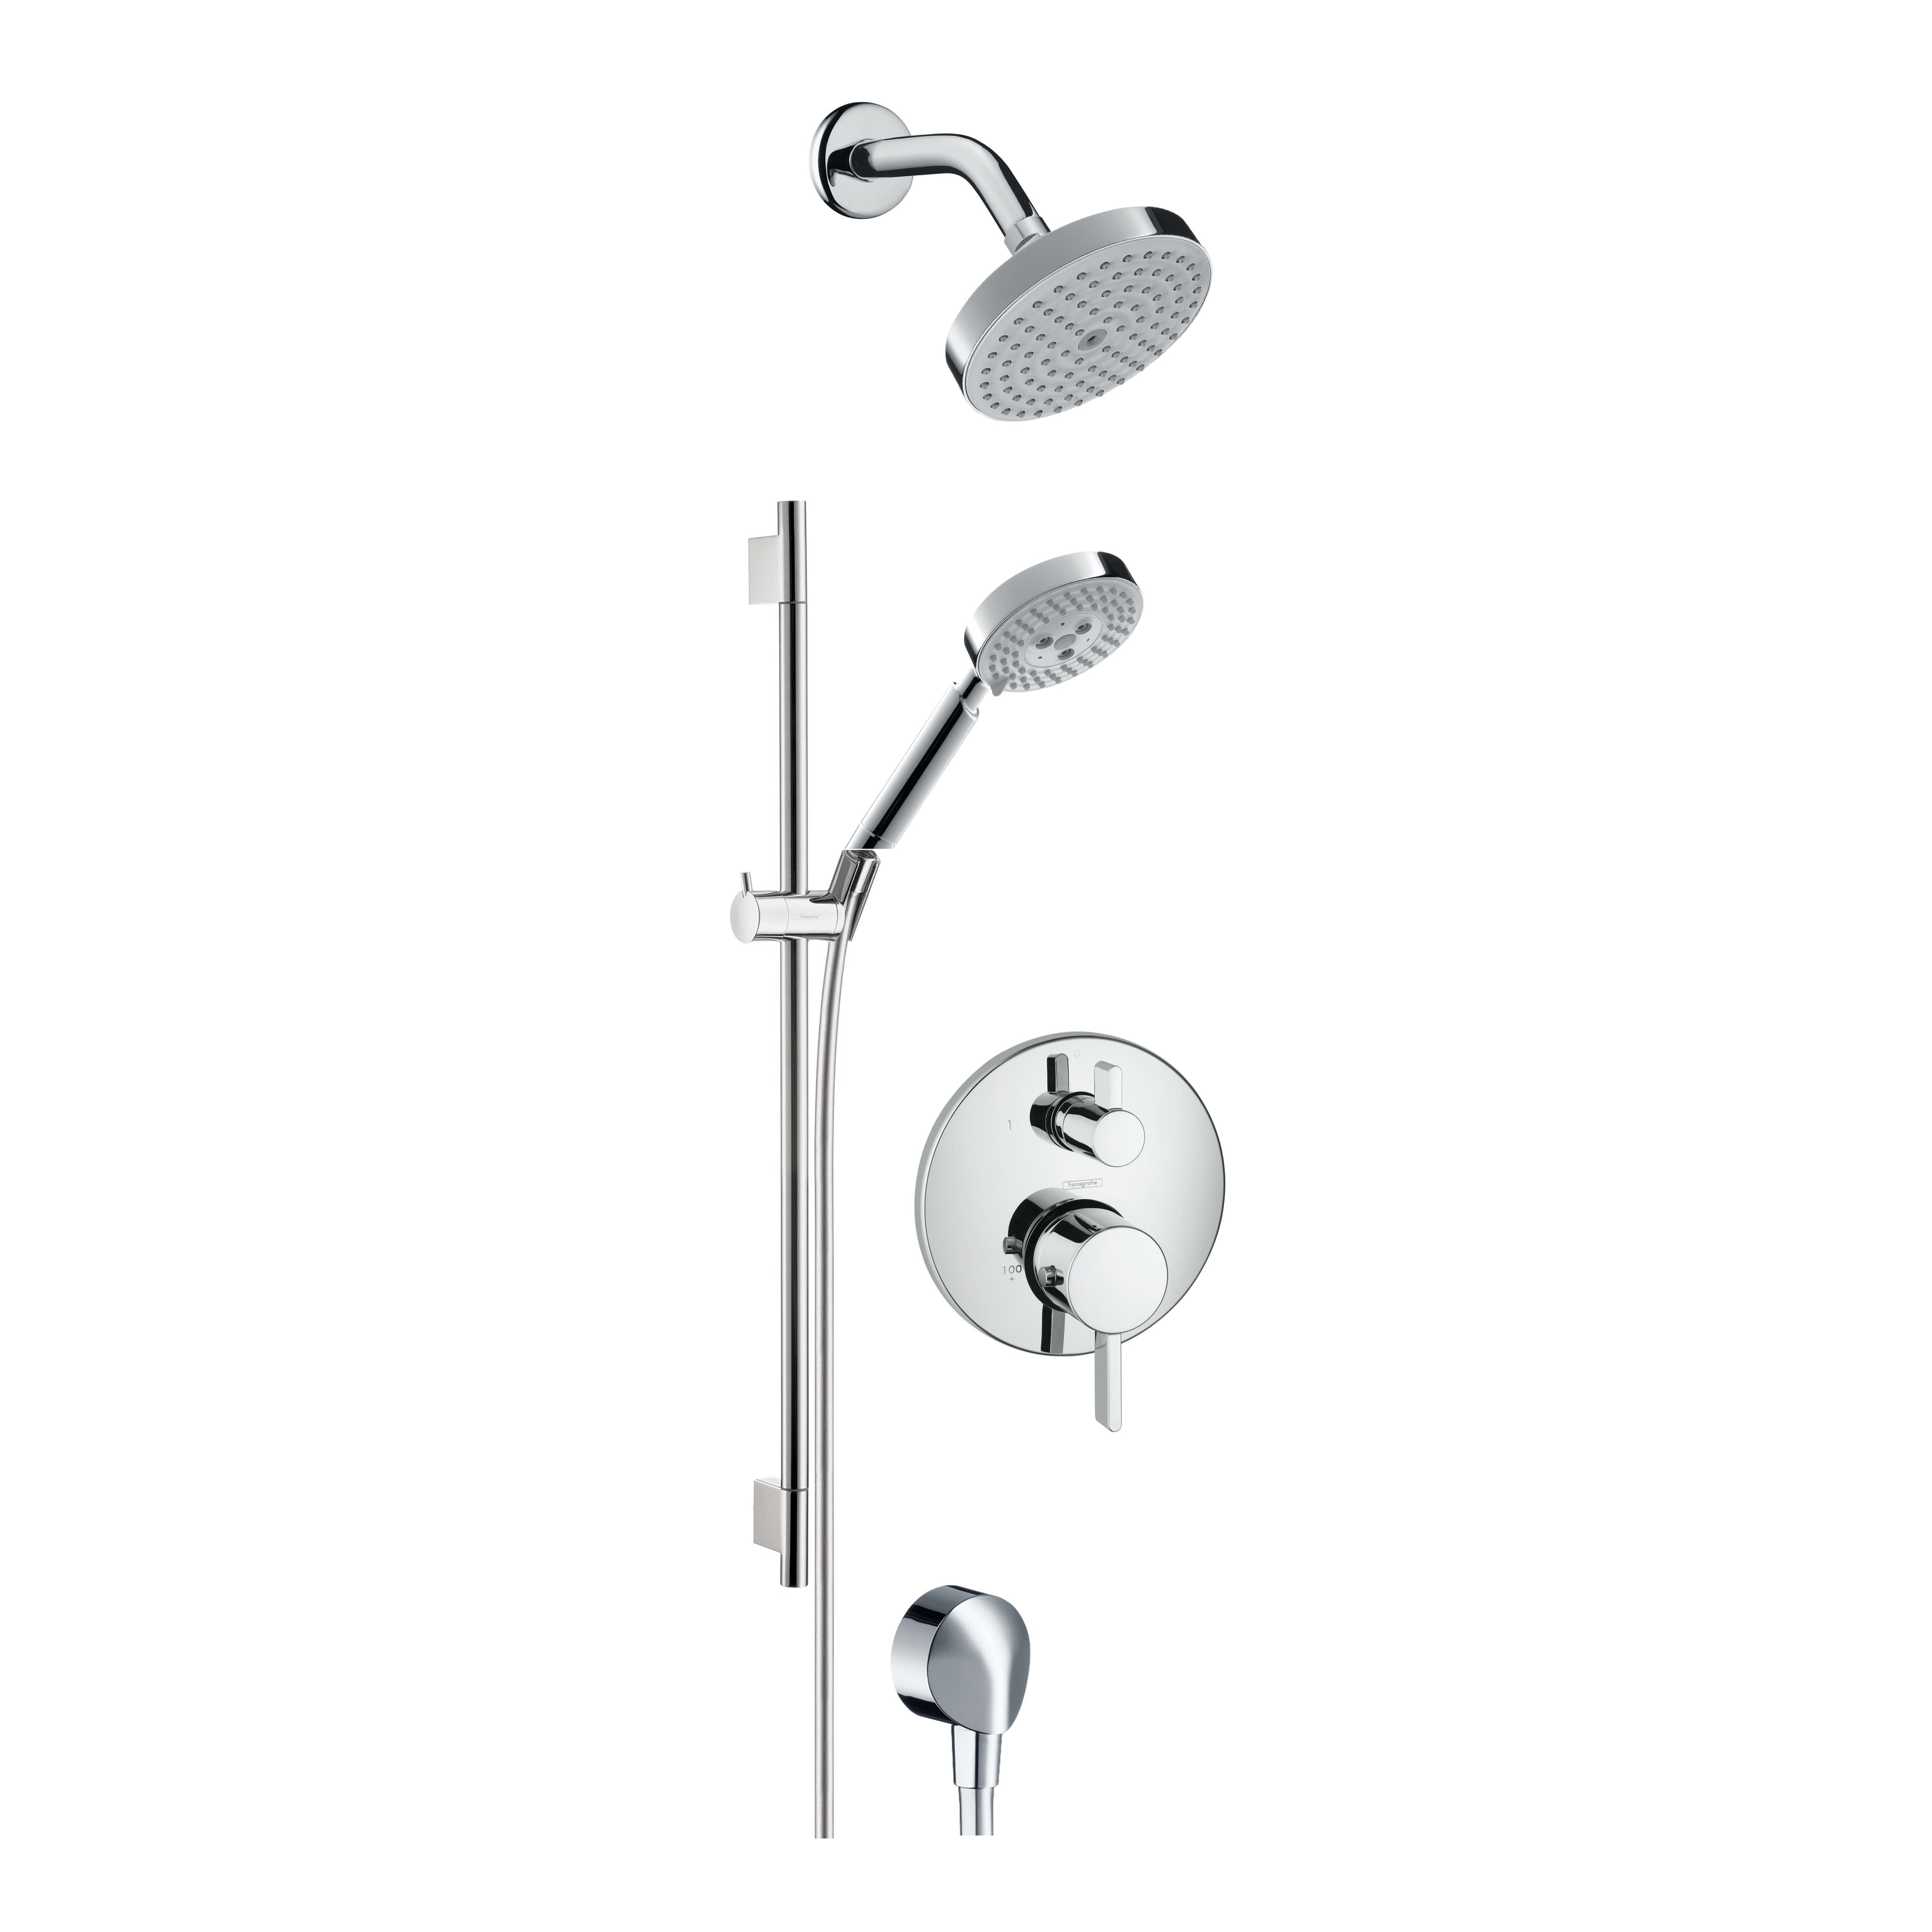 Hansgrohe HG-T201 Thermostatic Shower Set